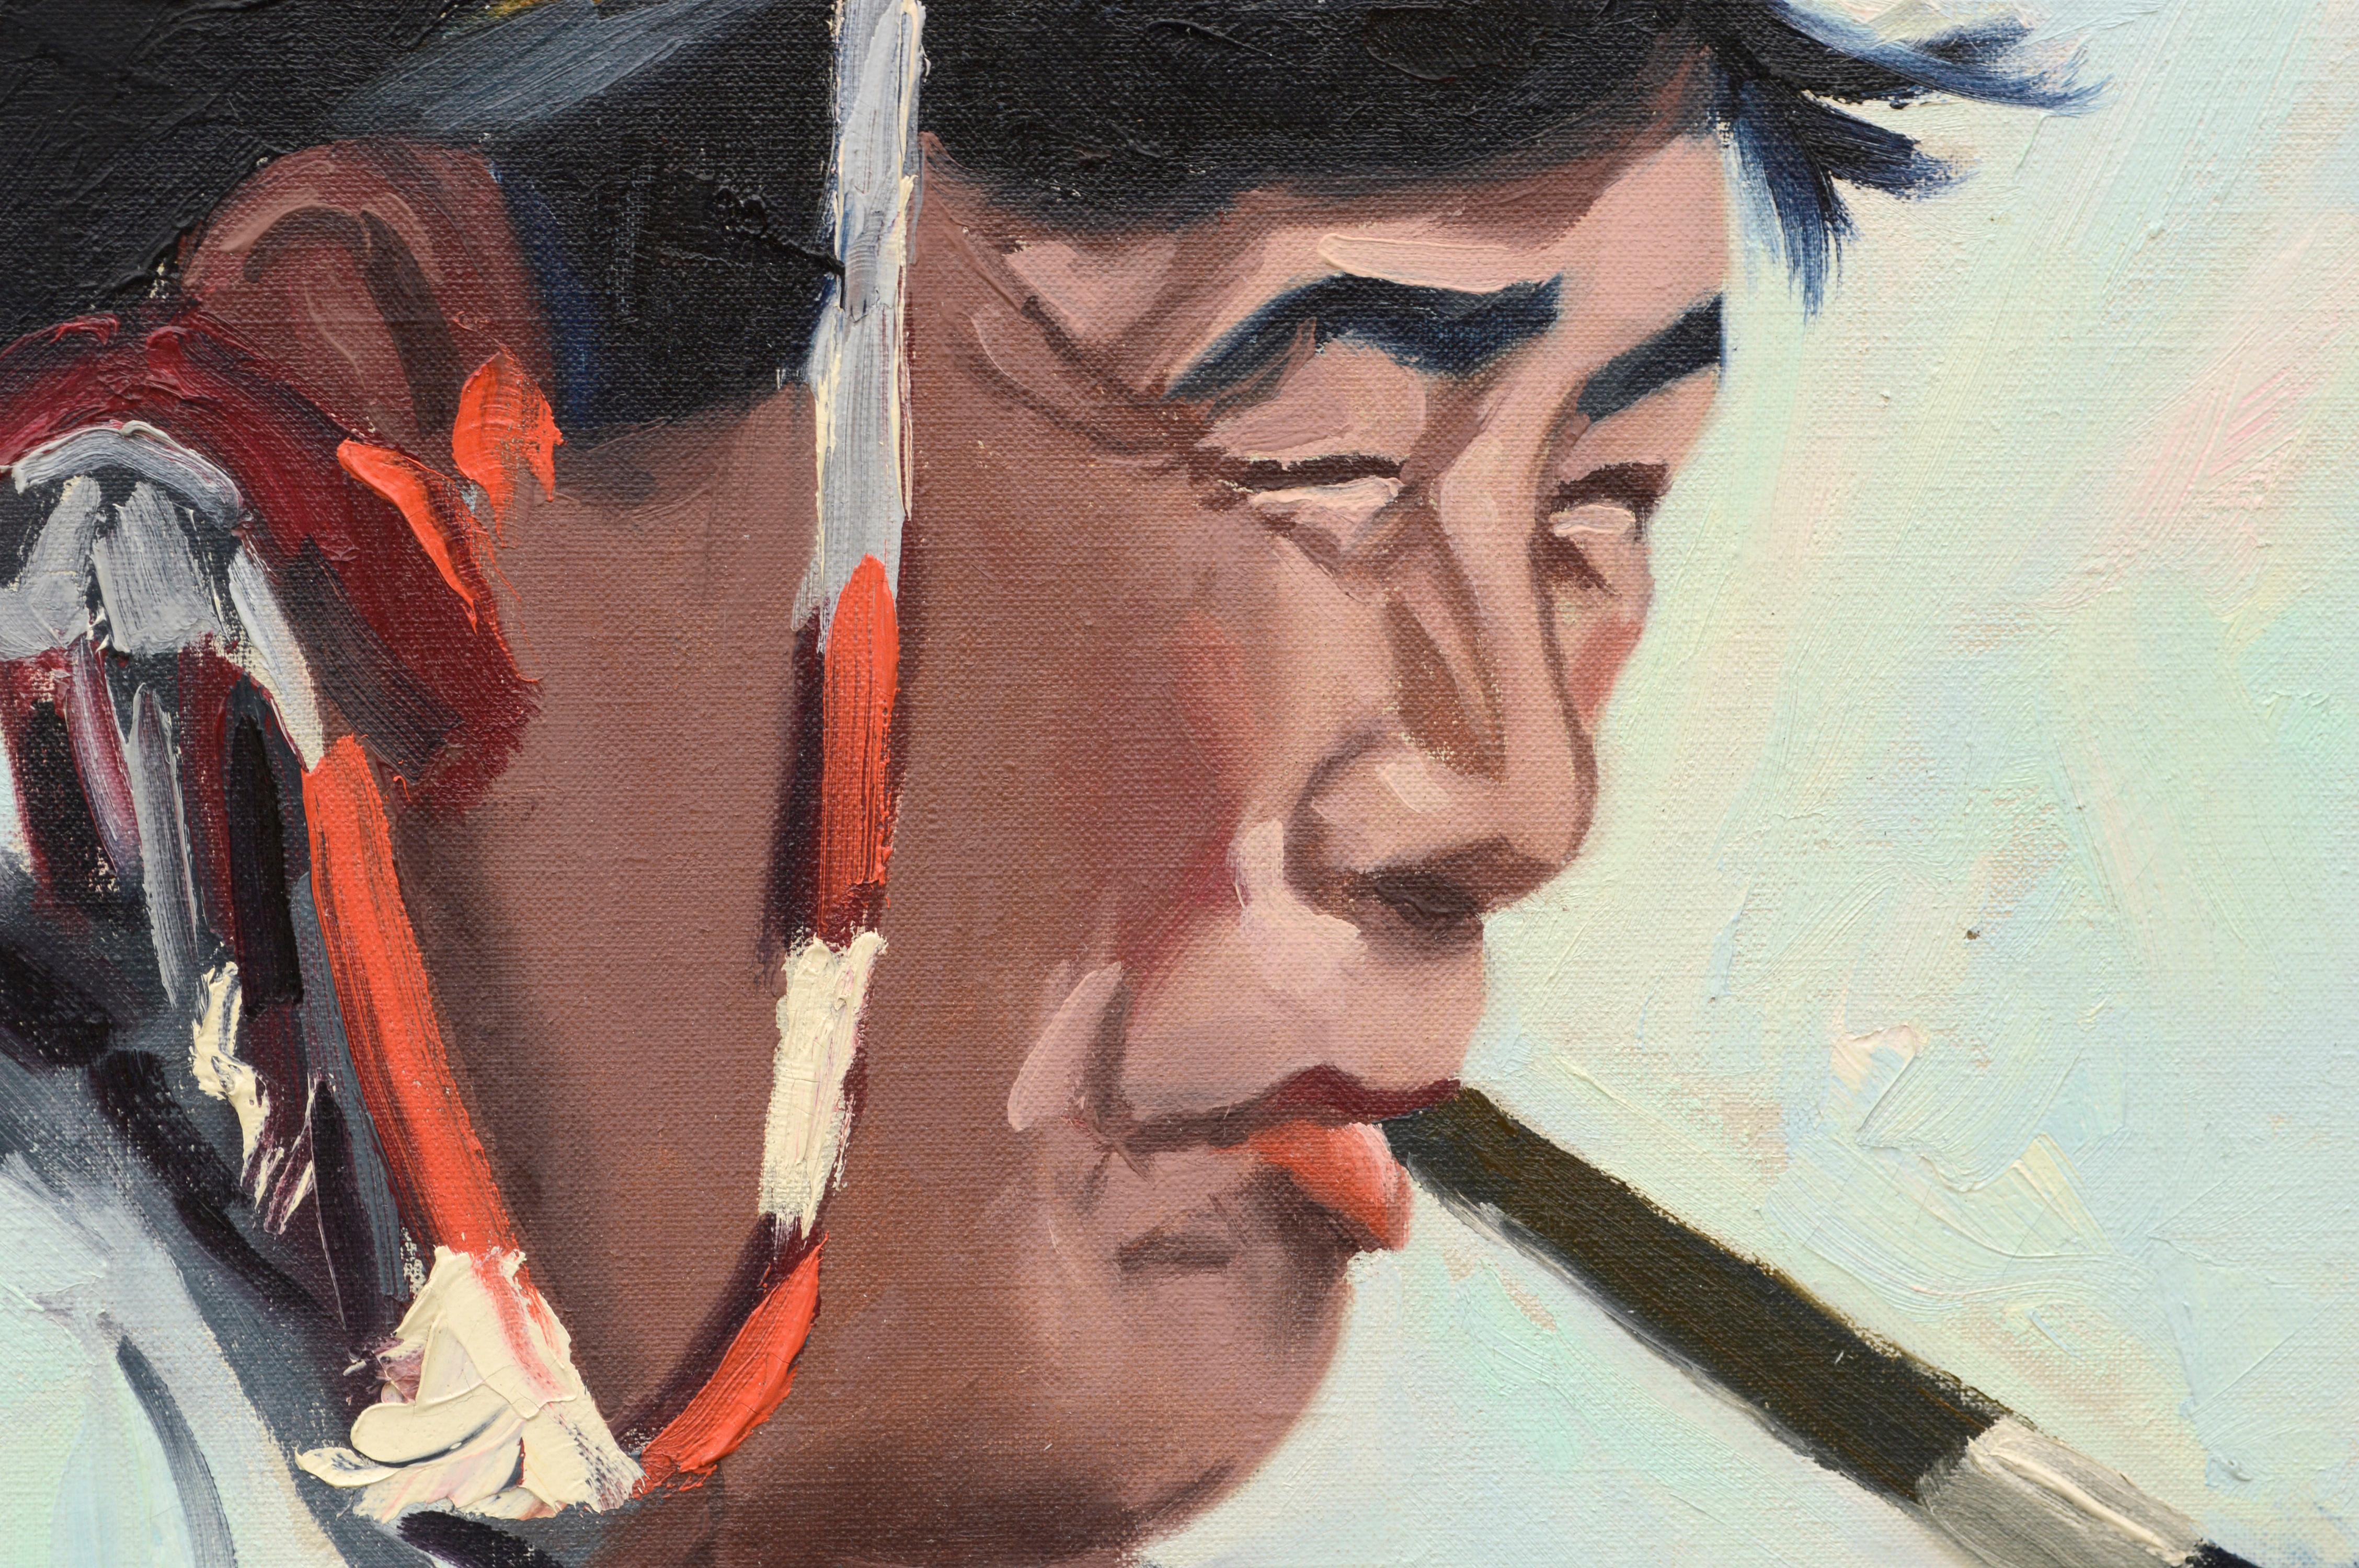 Inuit Eskimo Man Smoking a Pipe - Portrait Ann Bailey - Painting by Anny MK Bailey